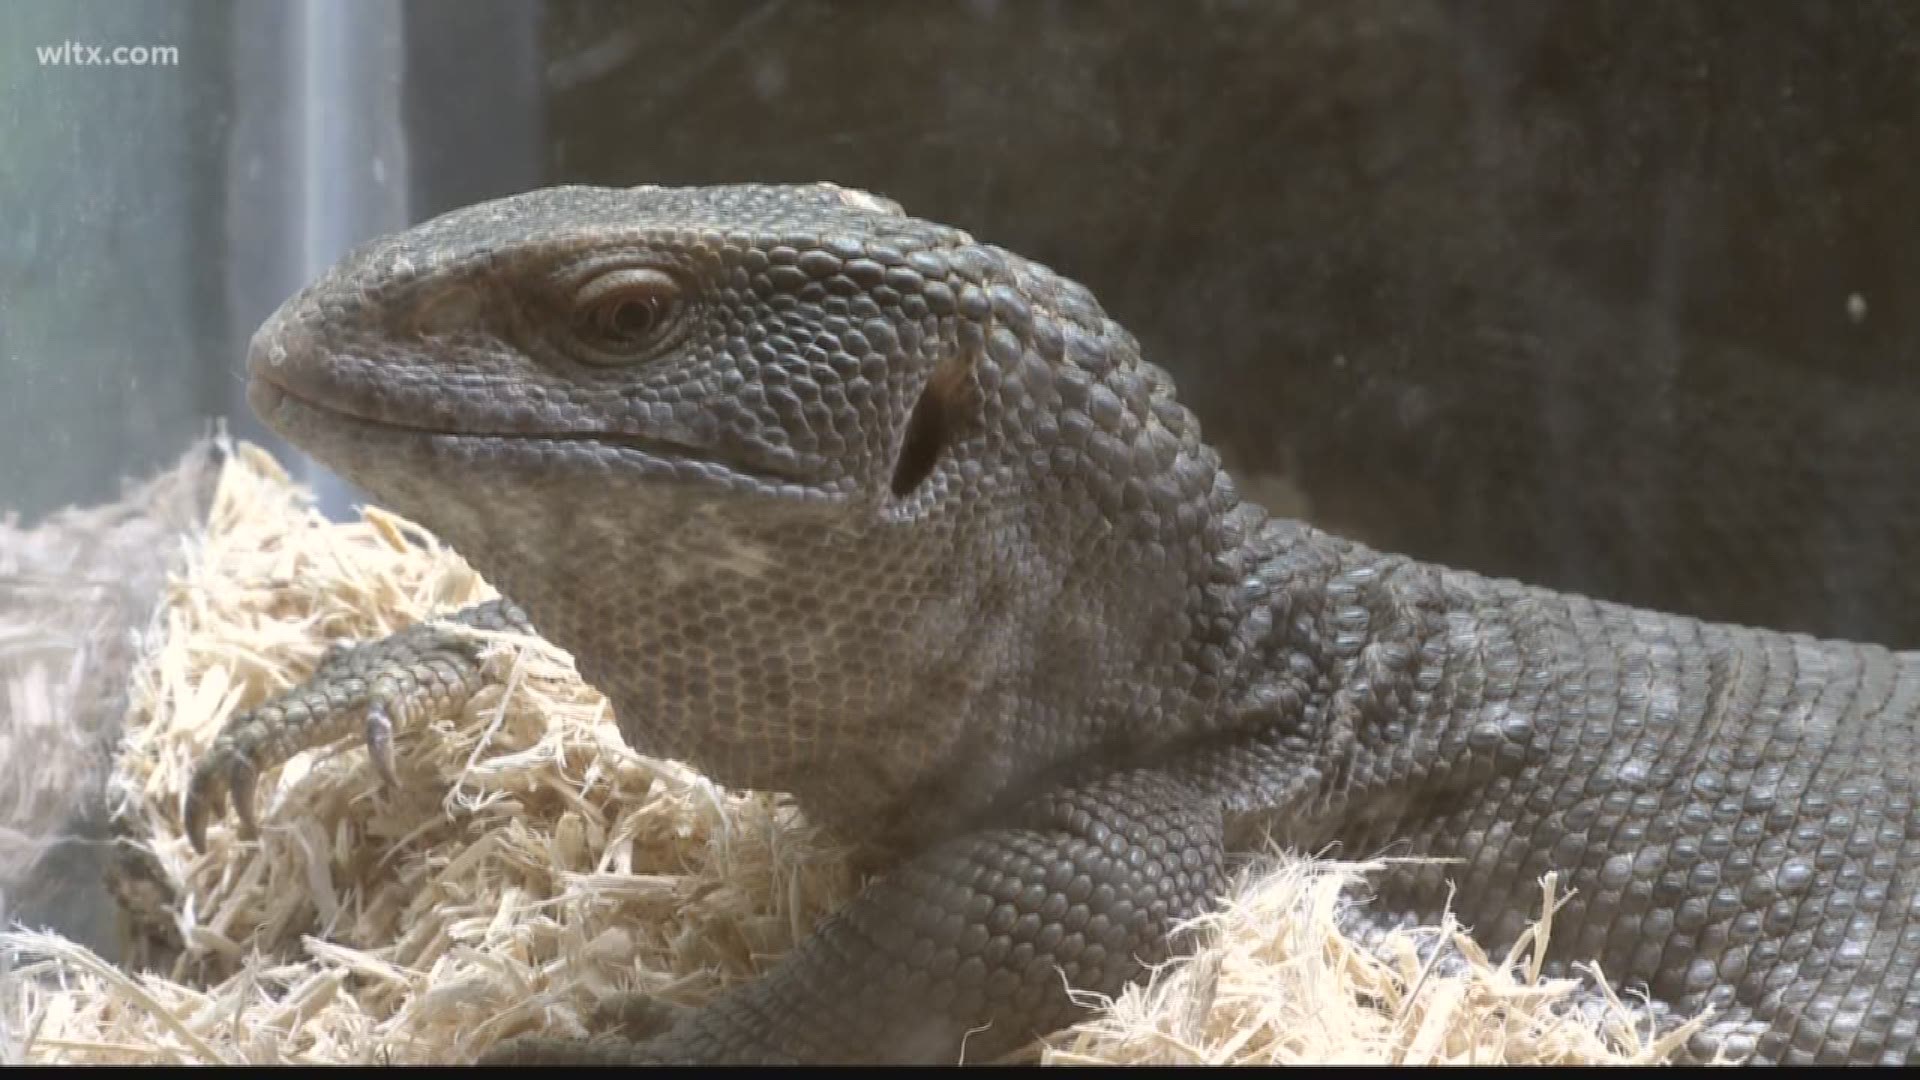 From lizards to snakes, hundreds of reptiles filled the Jamil Temple this weekend.  News19's Chandler Mack reports.